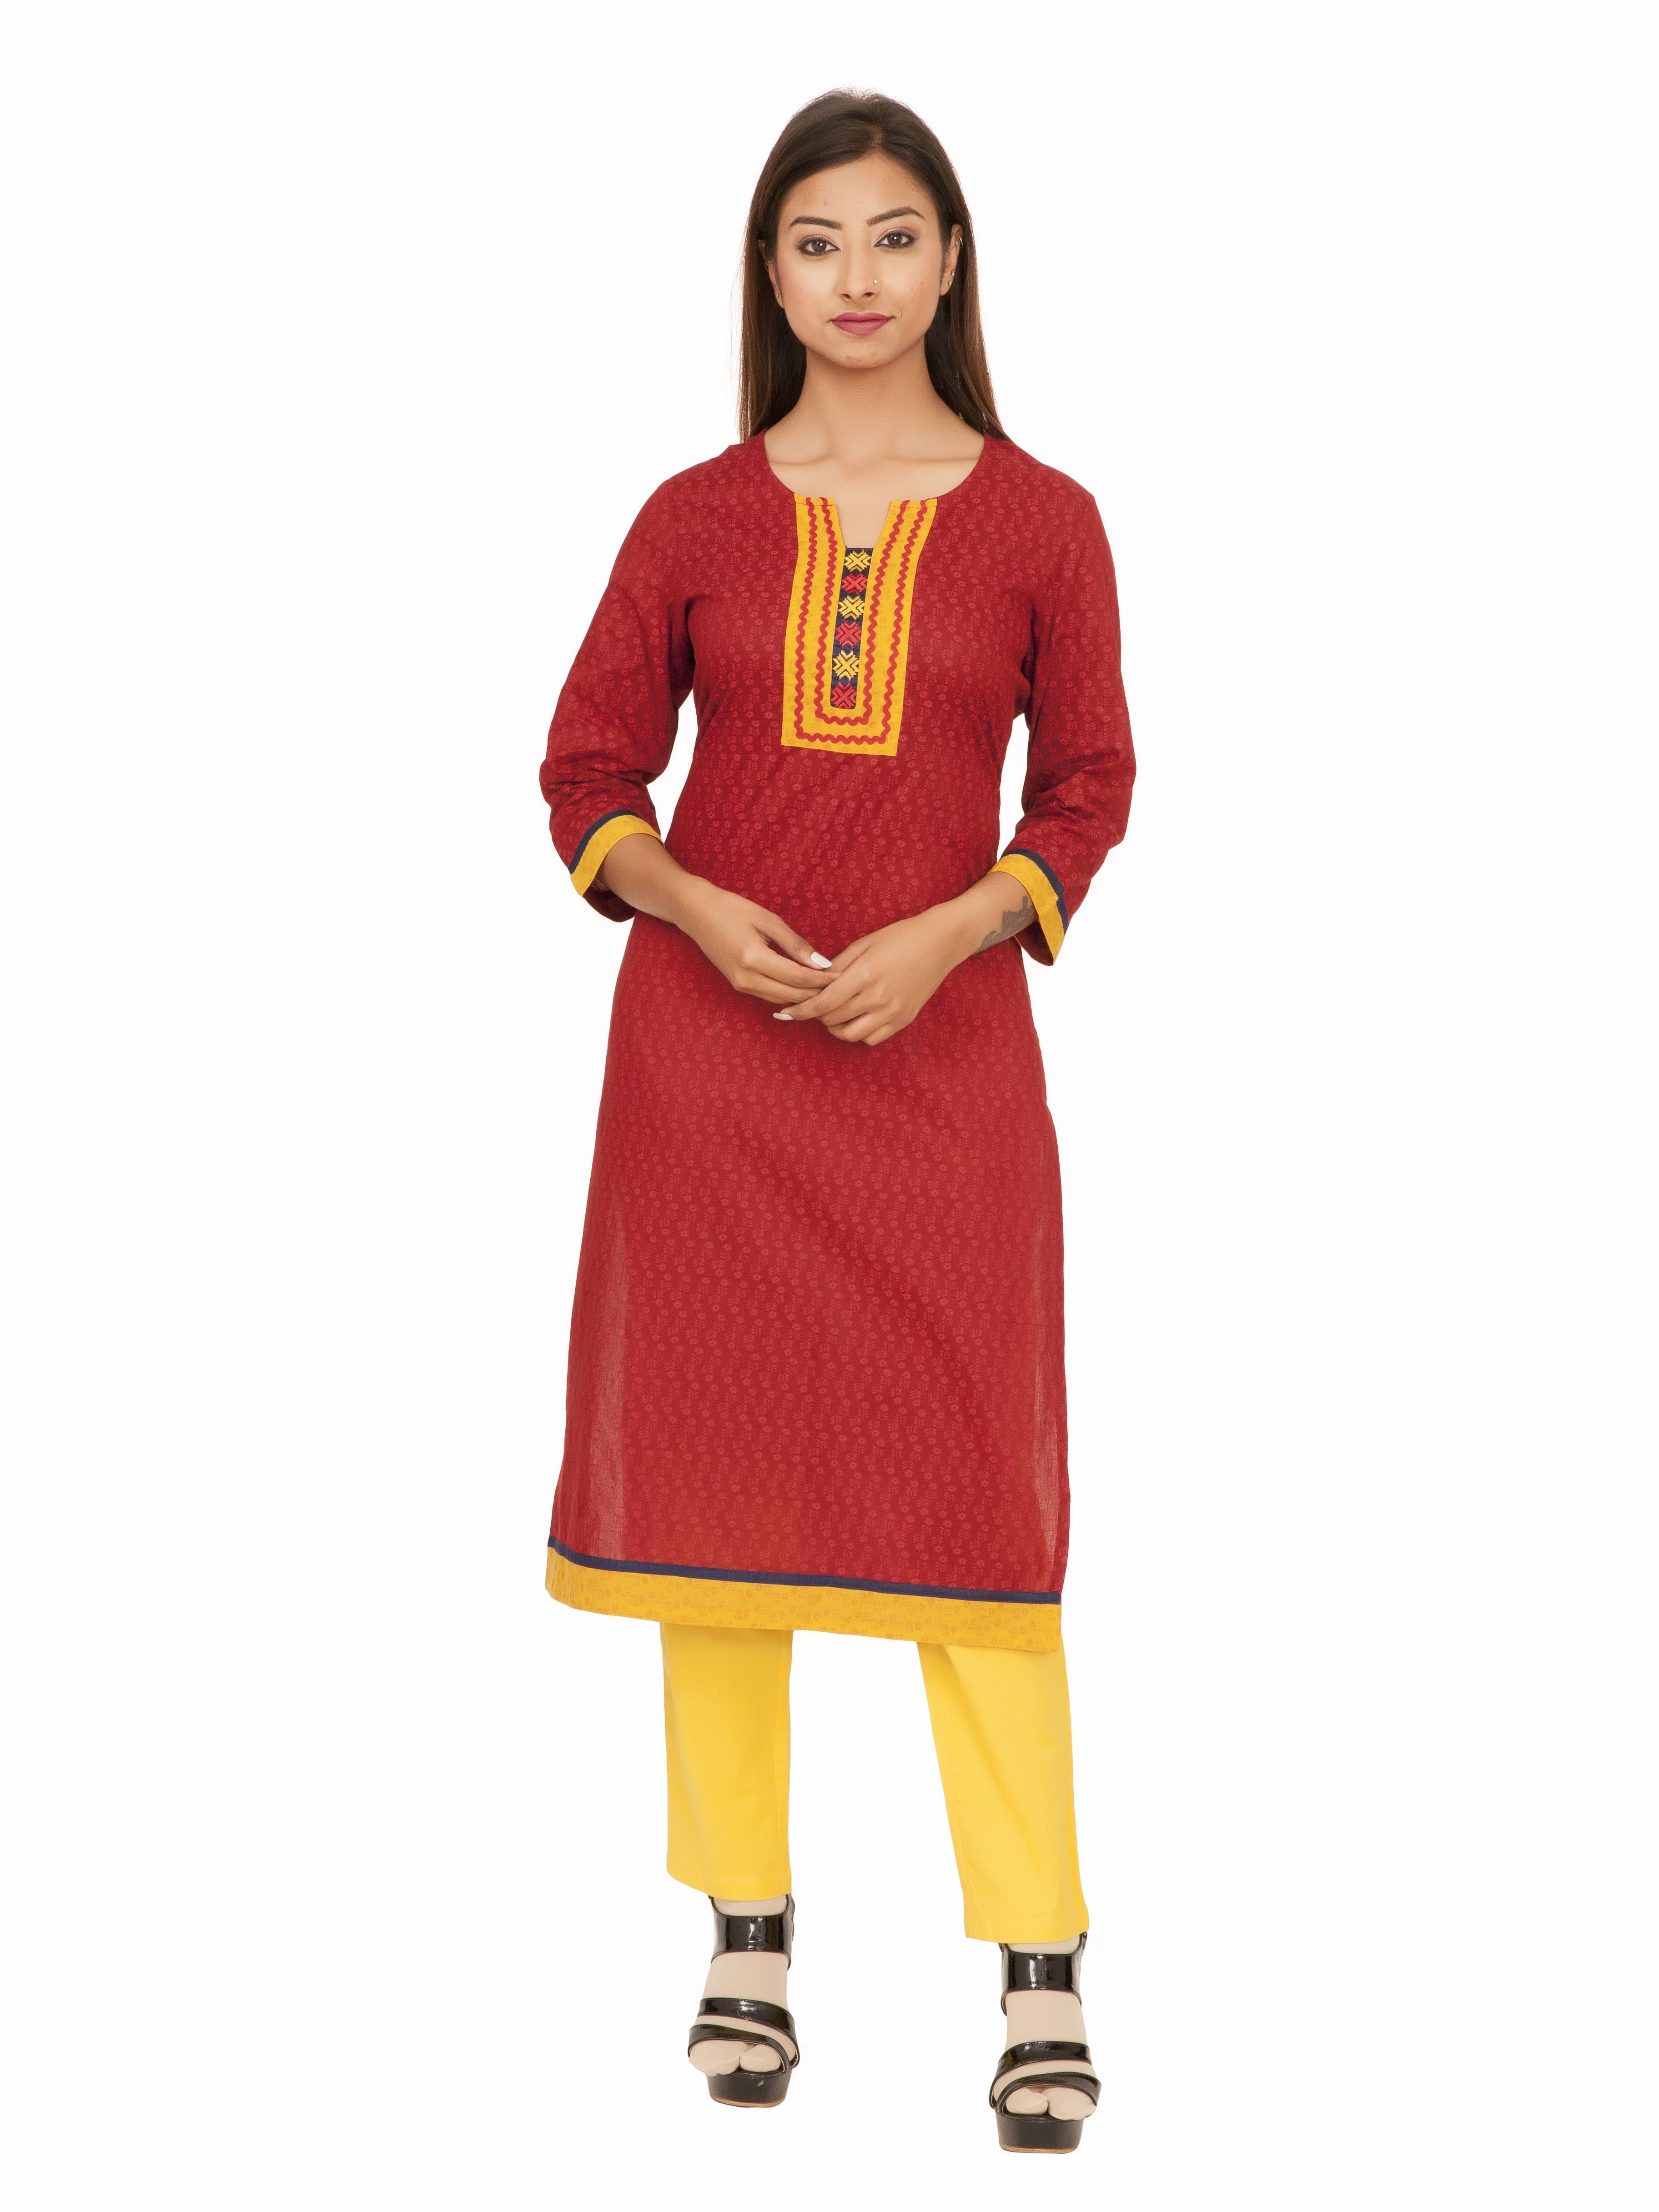 Wholesale Cloth Suppliers in India